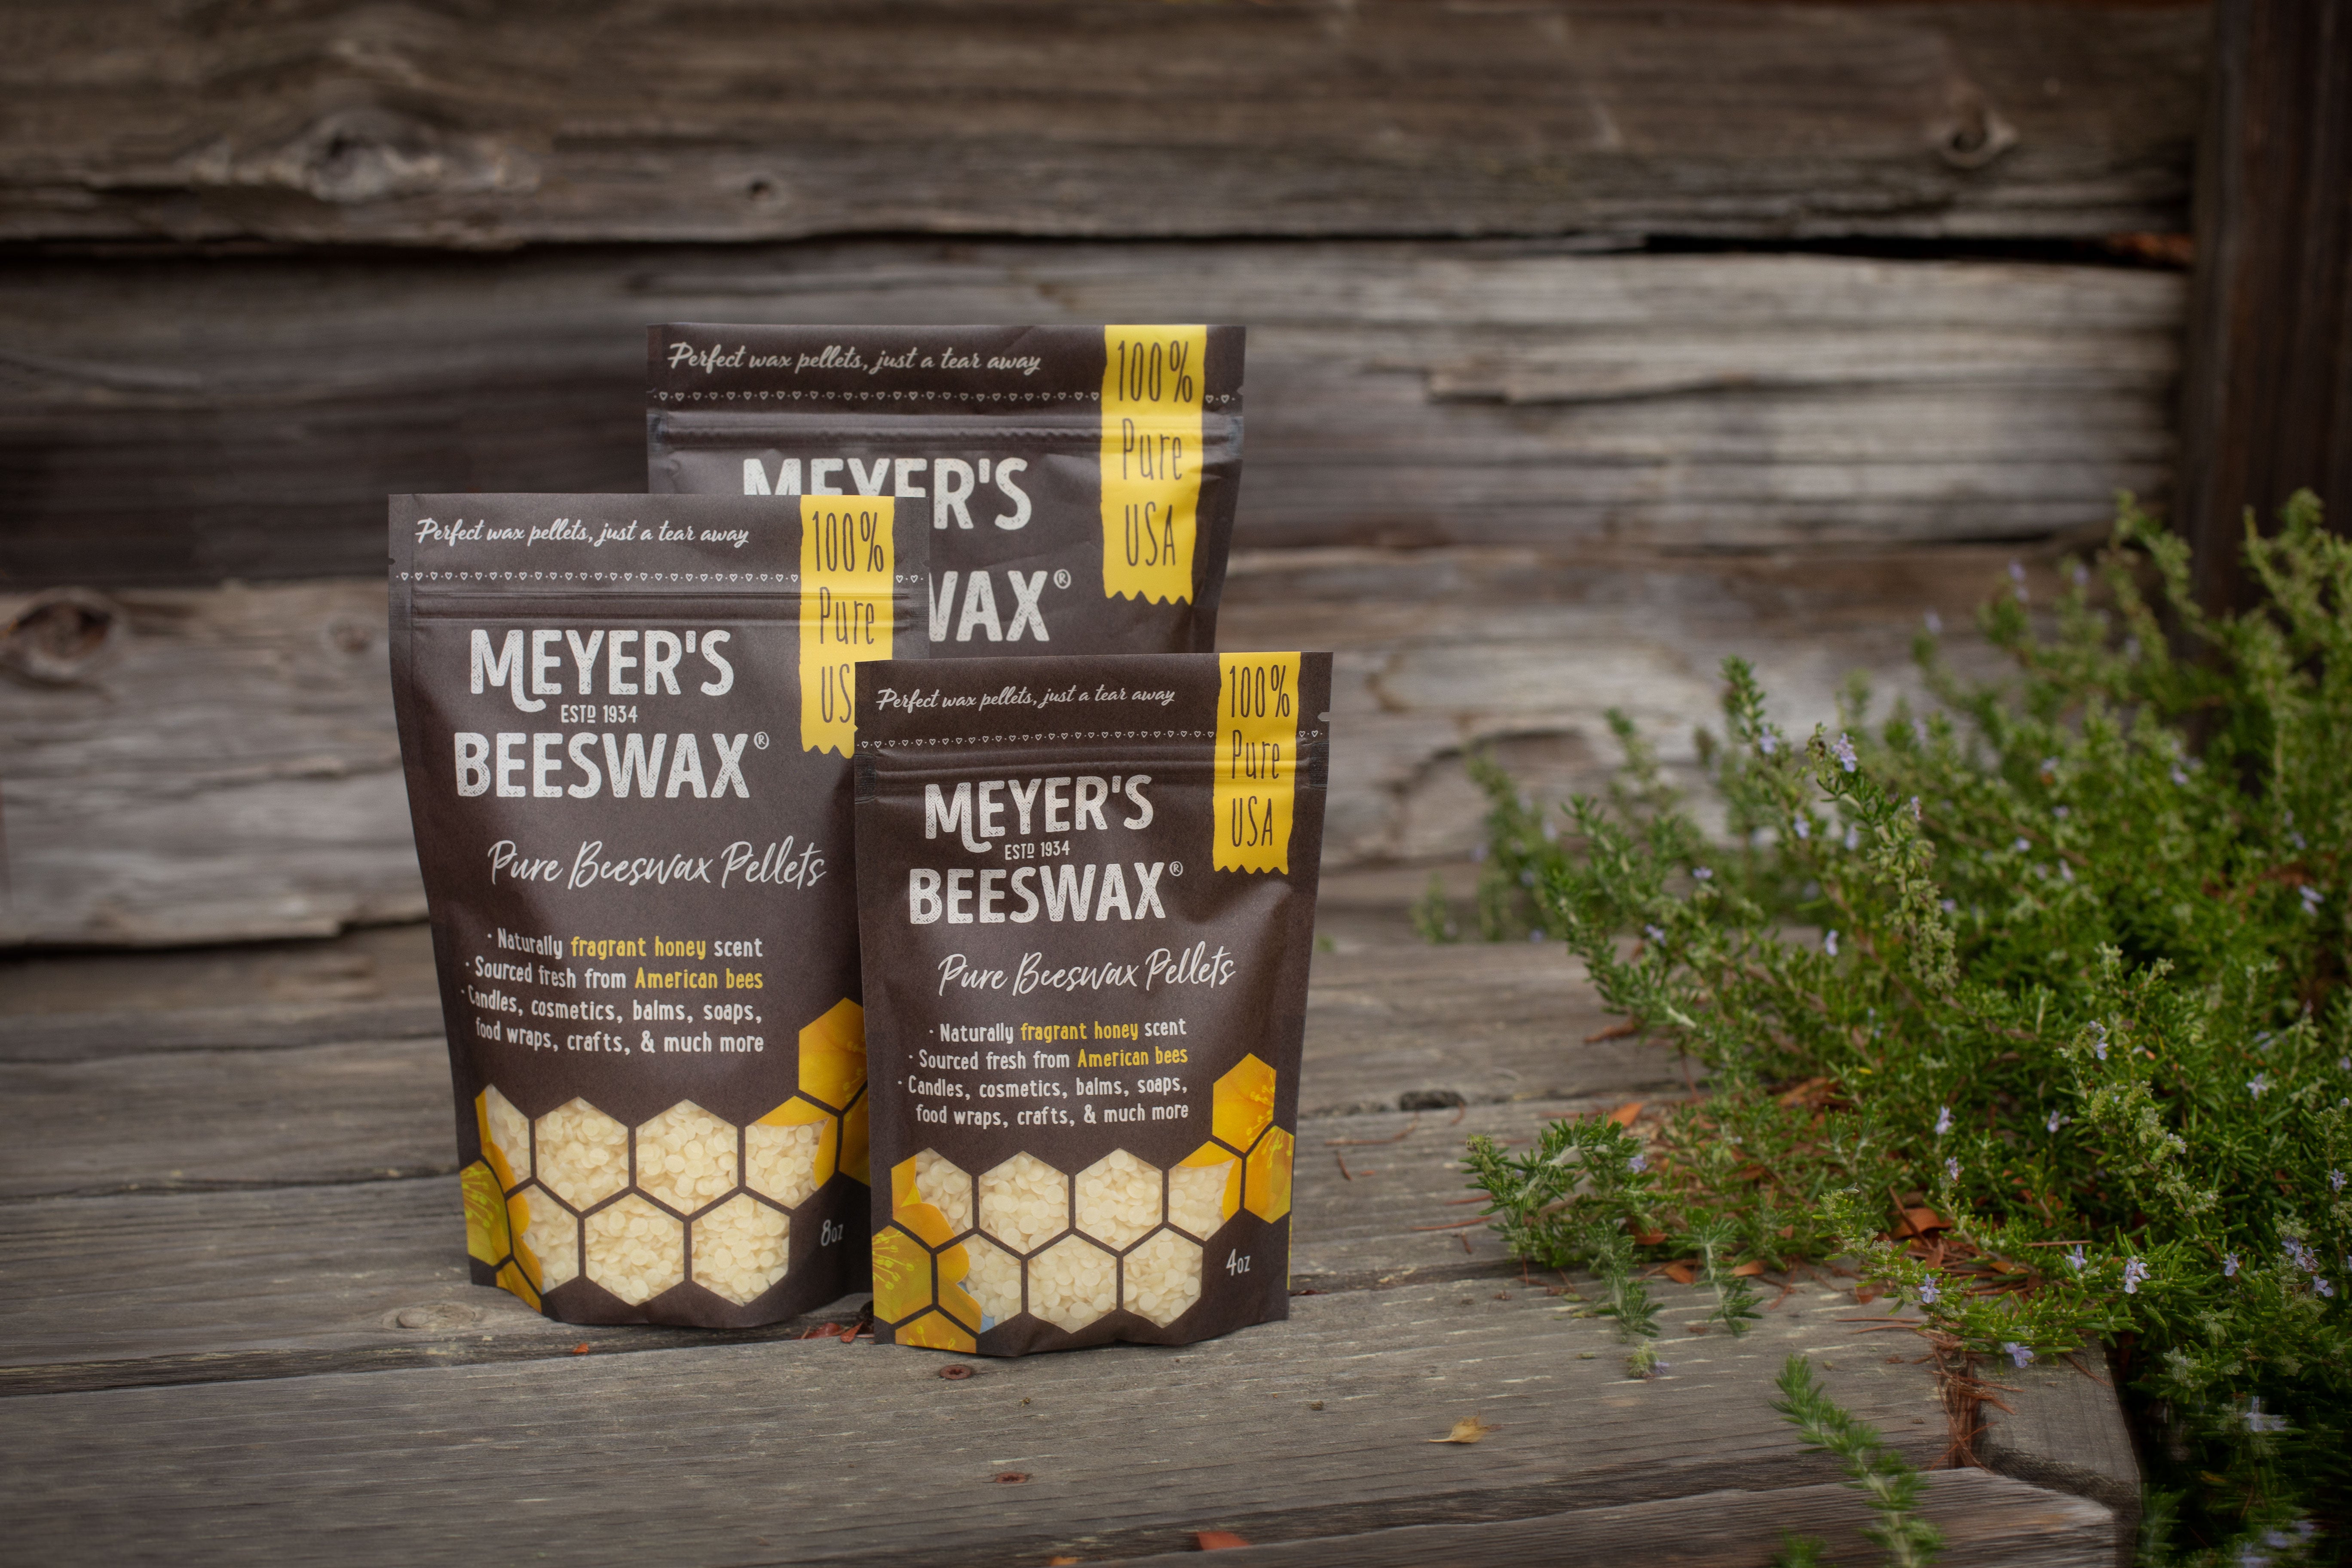 Meyer's Pure Domestic USA Beeswax, Not Imported, Chemical Free Triple Filtered Pellets for All Your Do It Yourself, Size: 16 oz